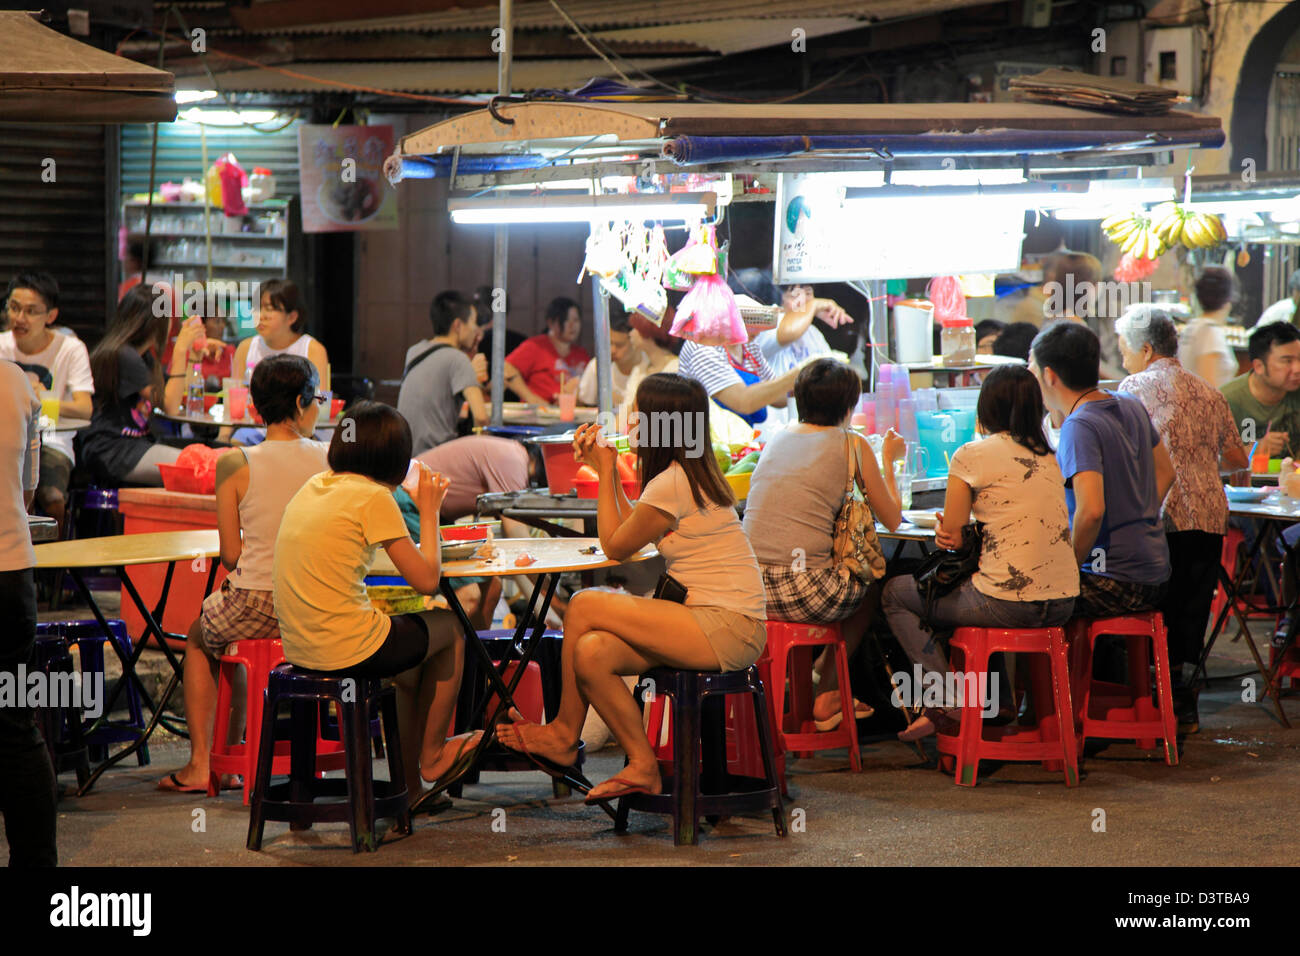 Penang Food Stall High Resolution Stock Photography and Images - Alamy